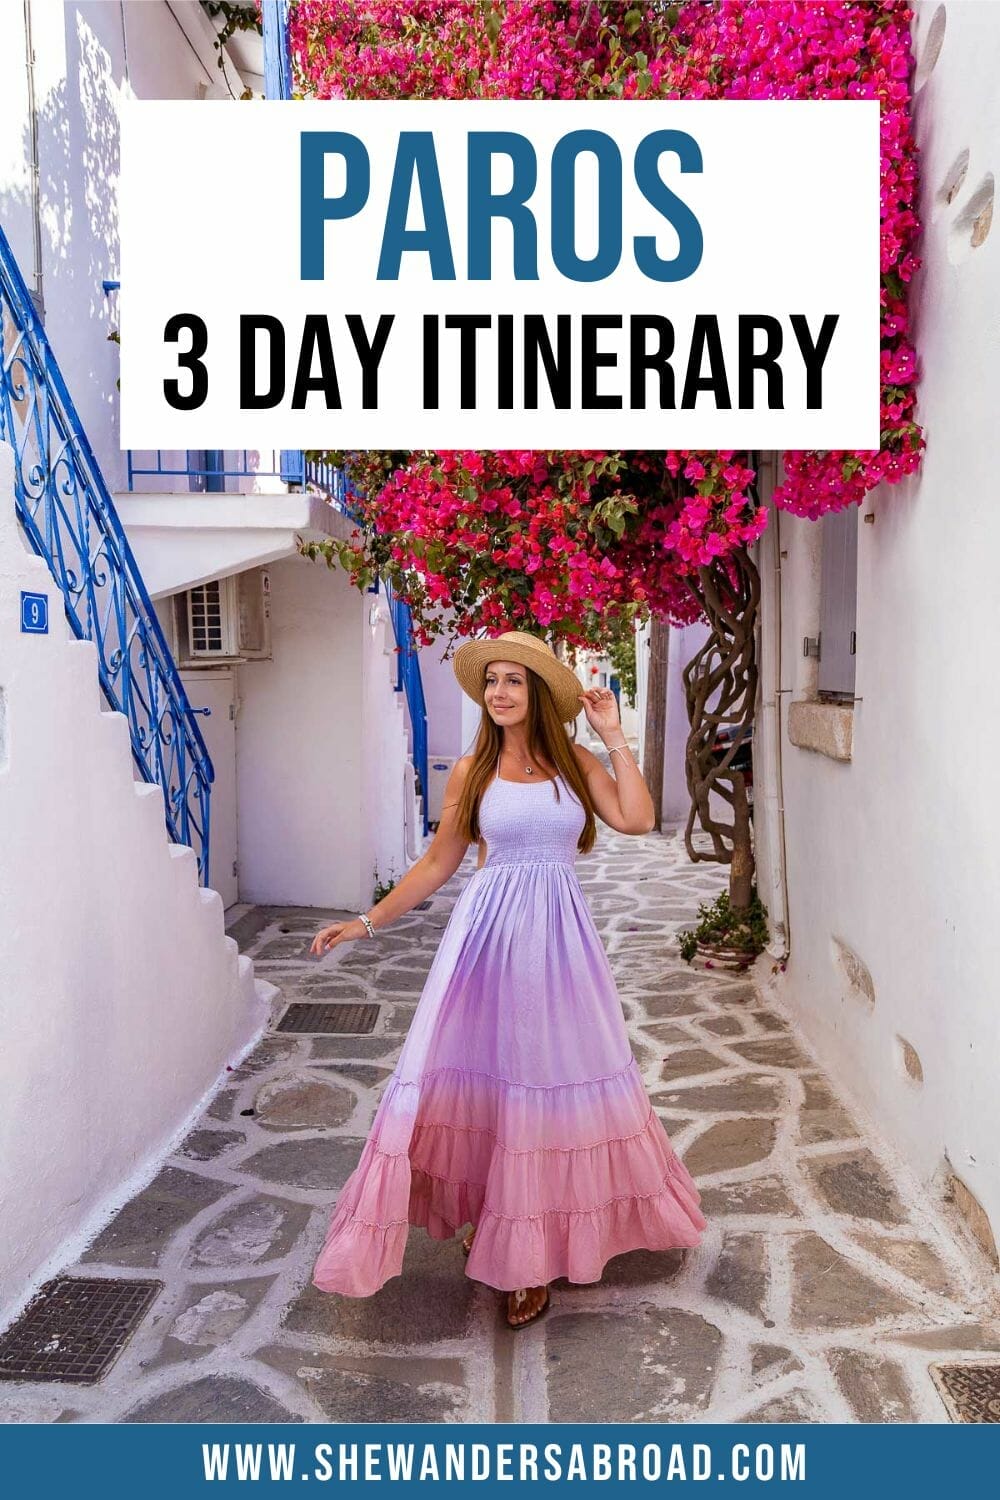 The Perfect 3 Days in Paros Itinerary for First Timers